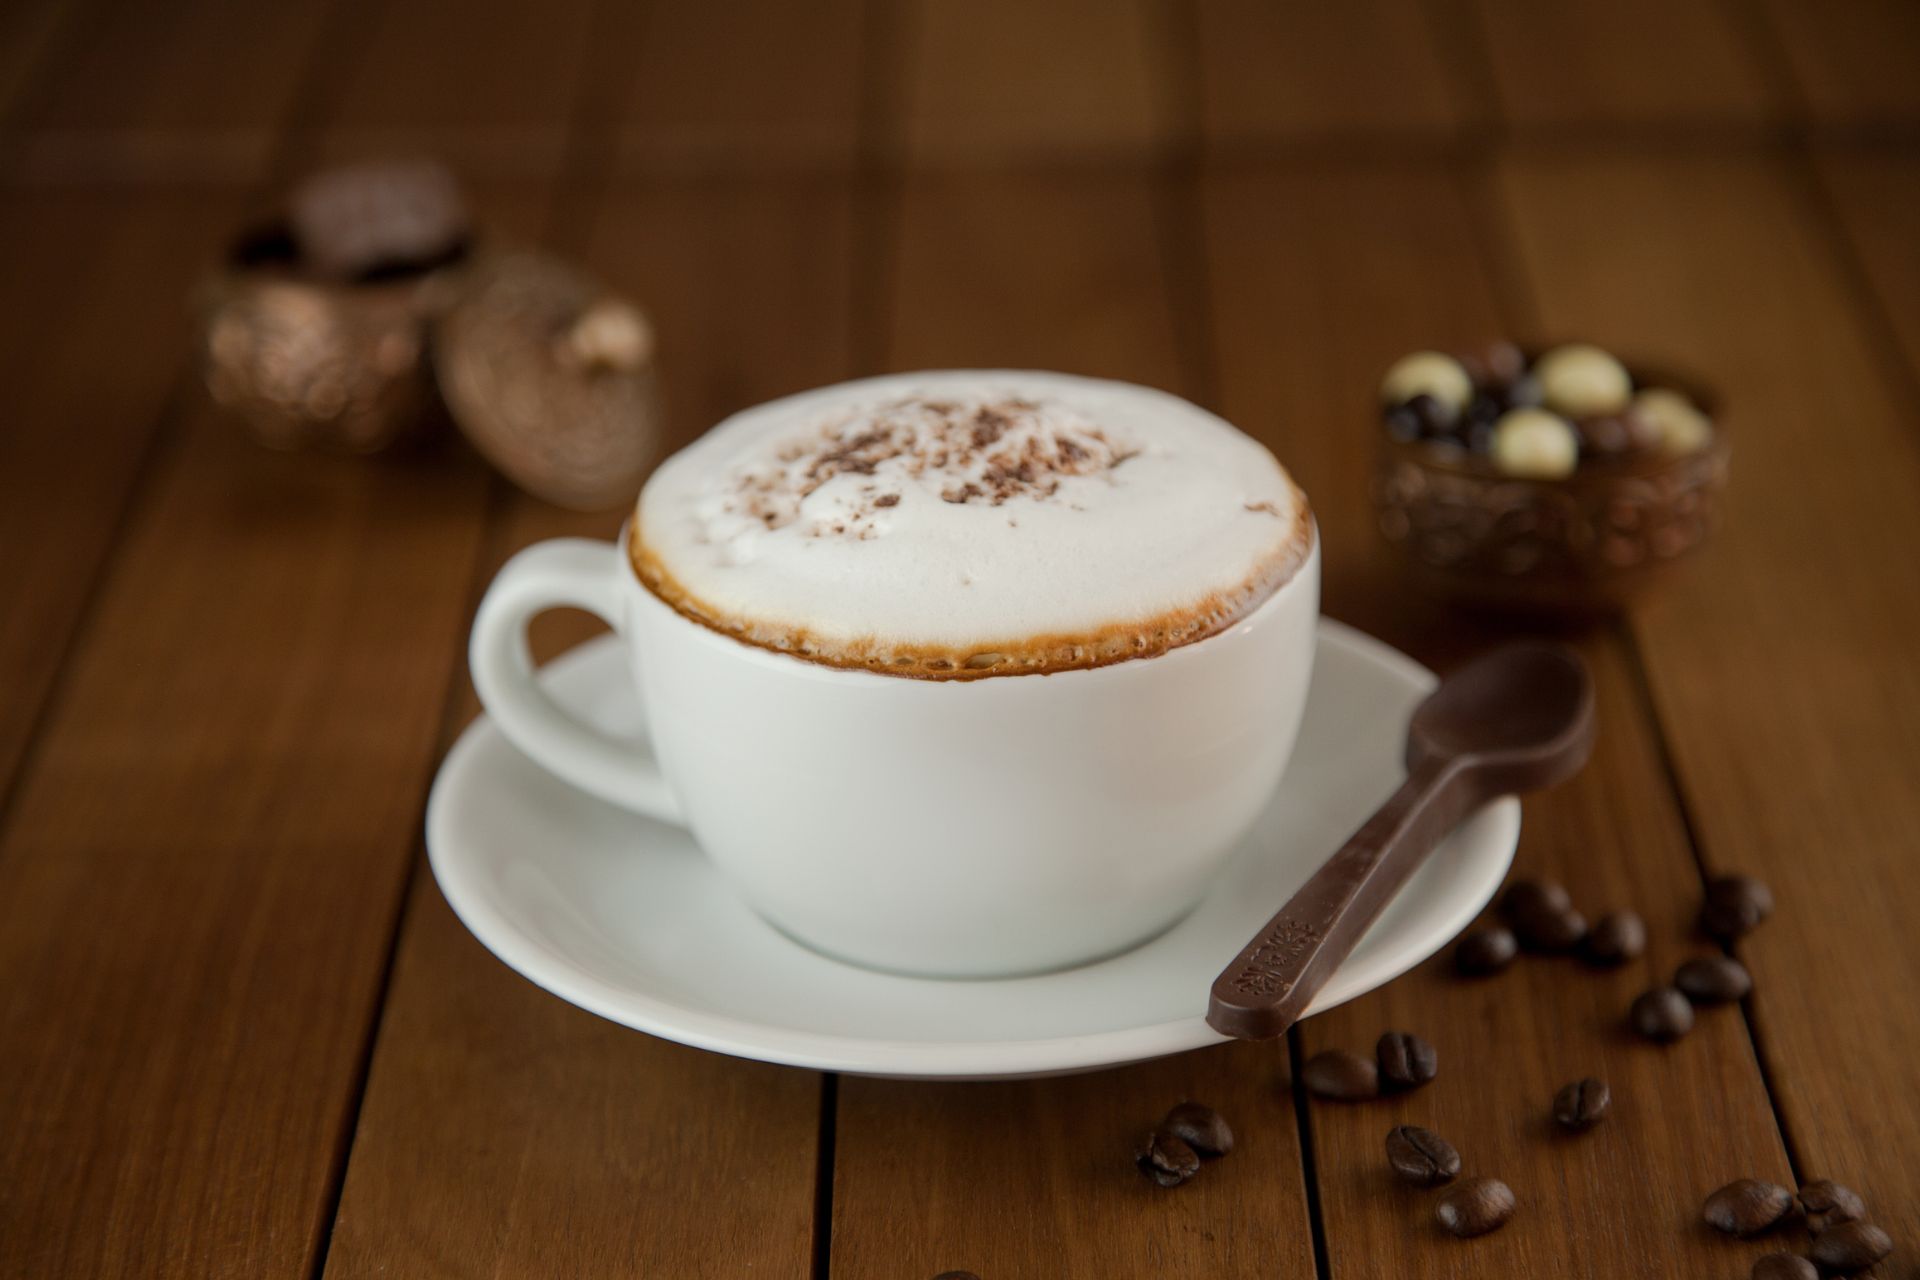 What Chocolate Goes On Top Of Cappuccino?